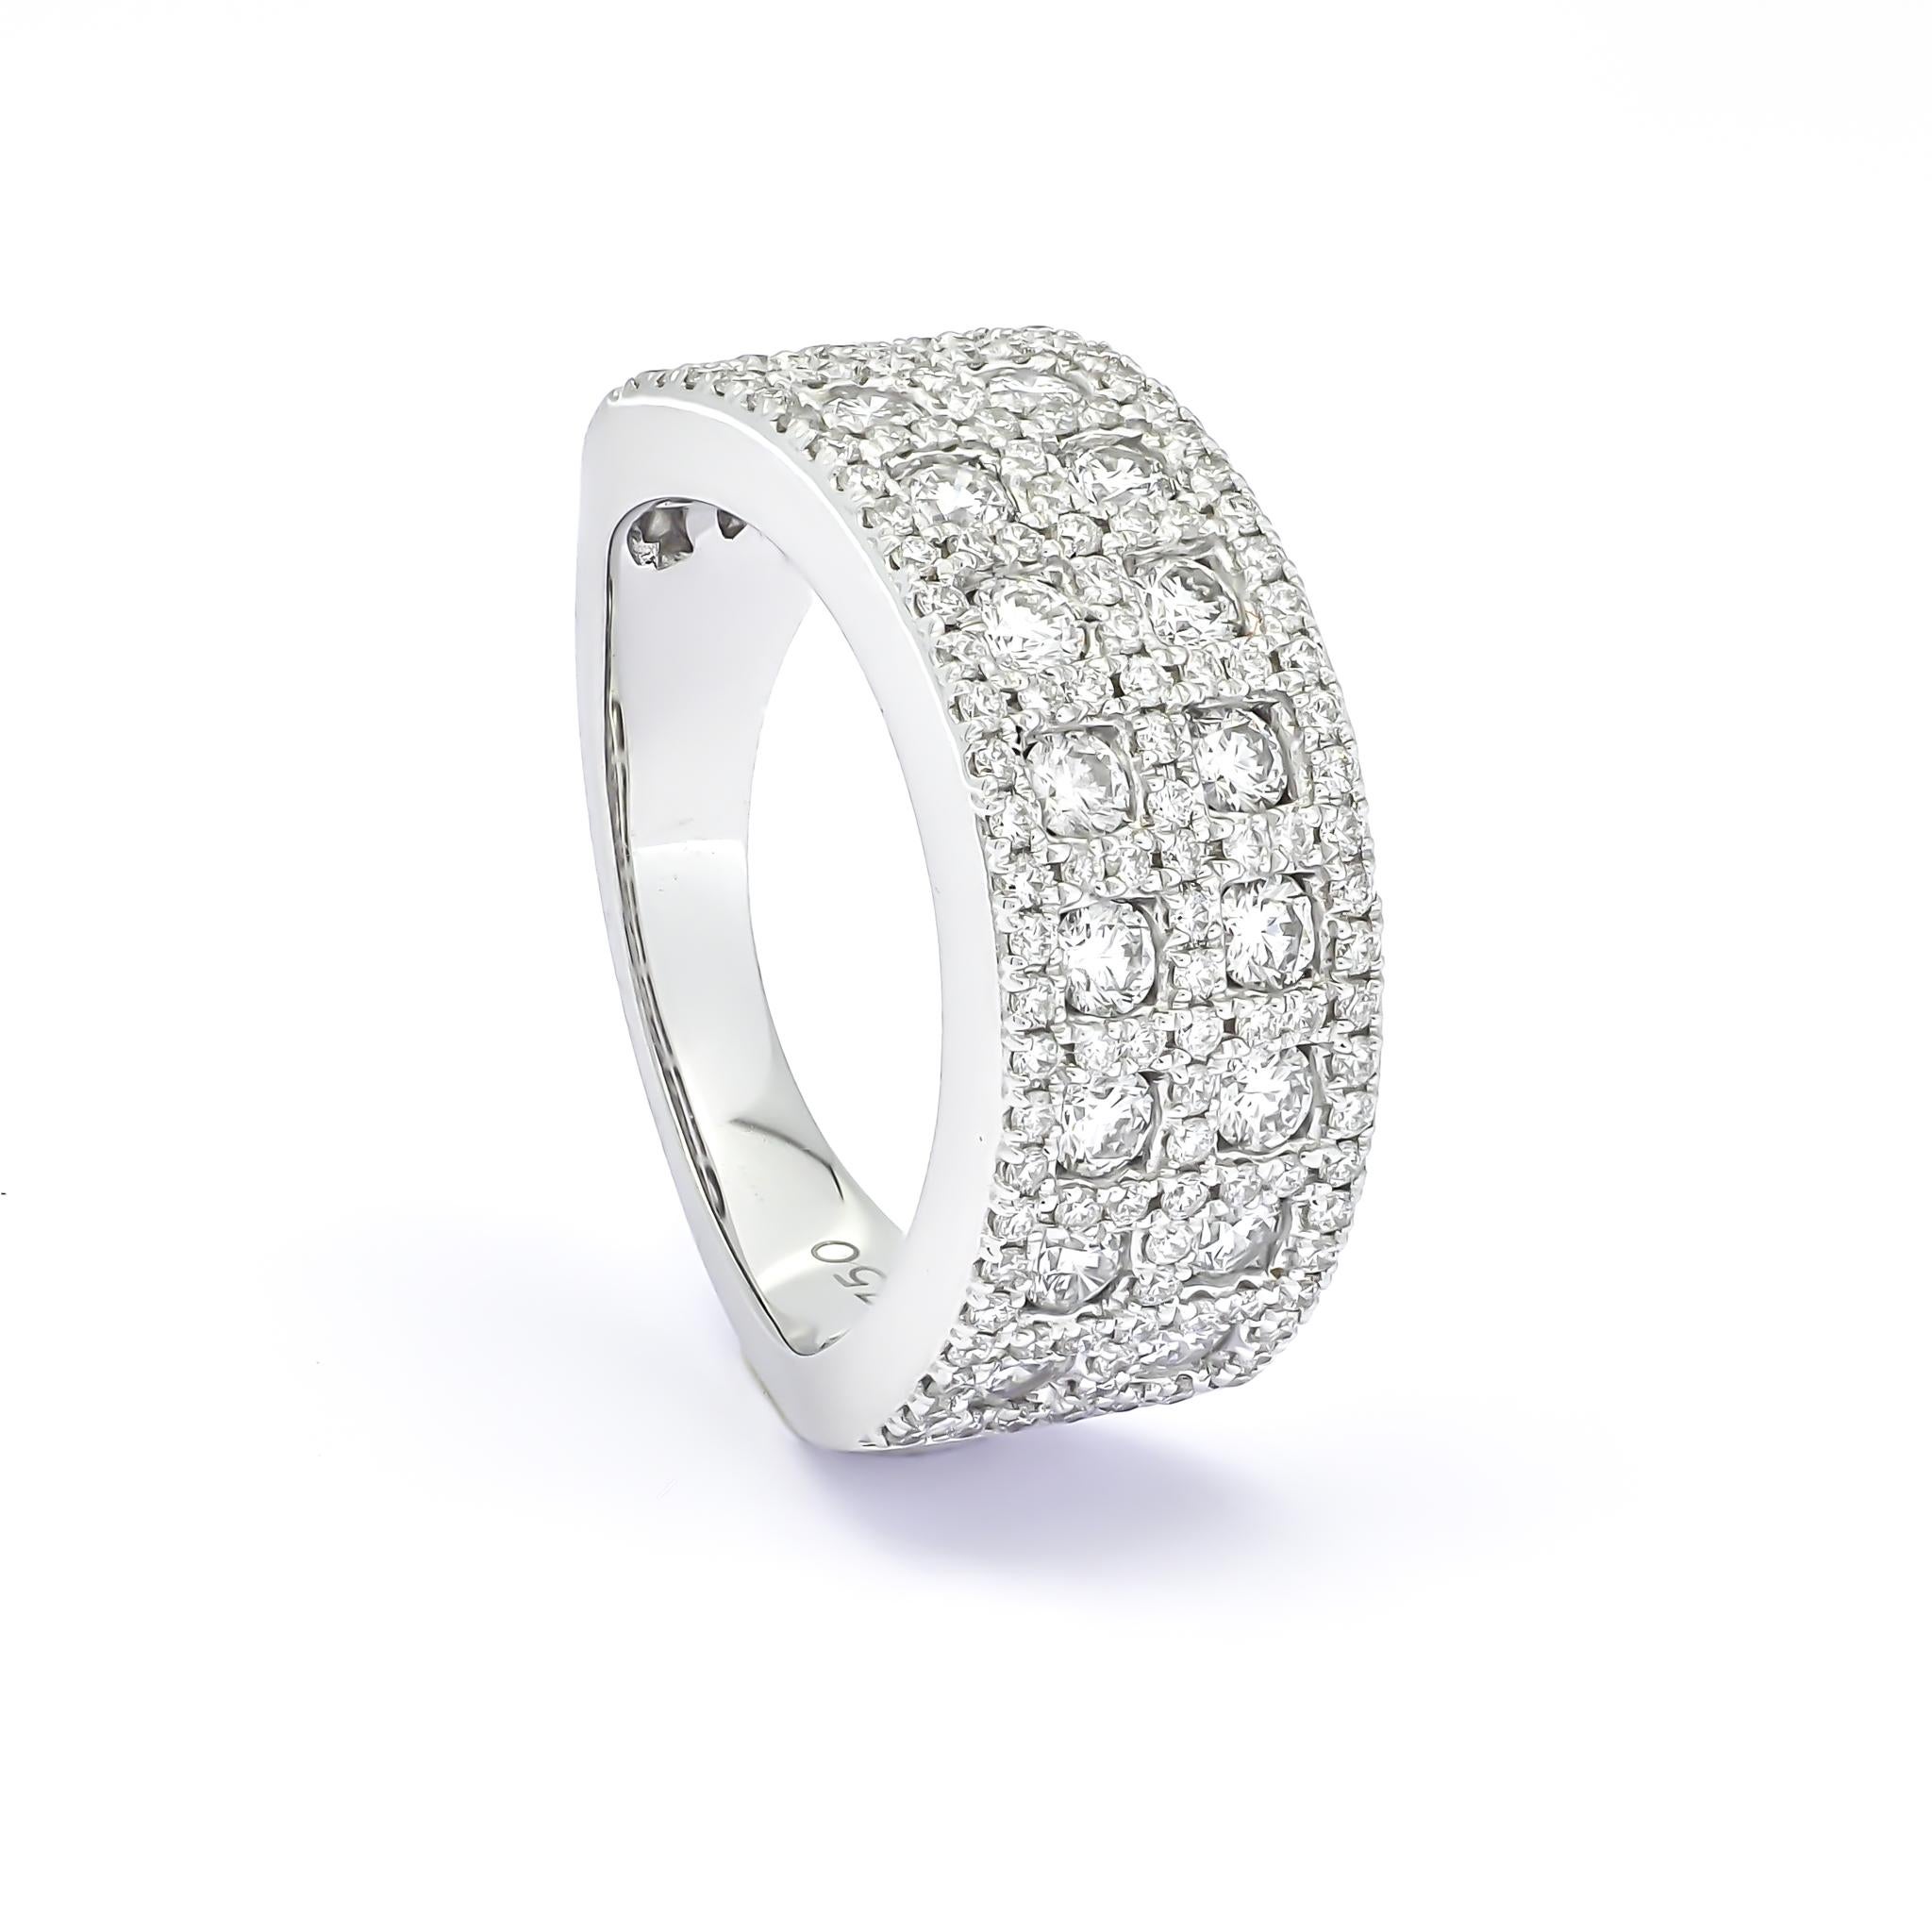 Round Cut Natural Diamond 1.55 carats 18 Karat White Gold Cocktail Band Ring For Sale